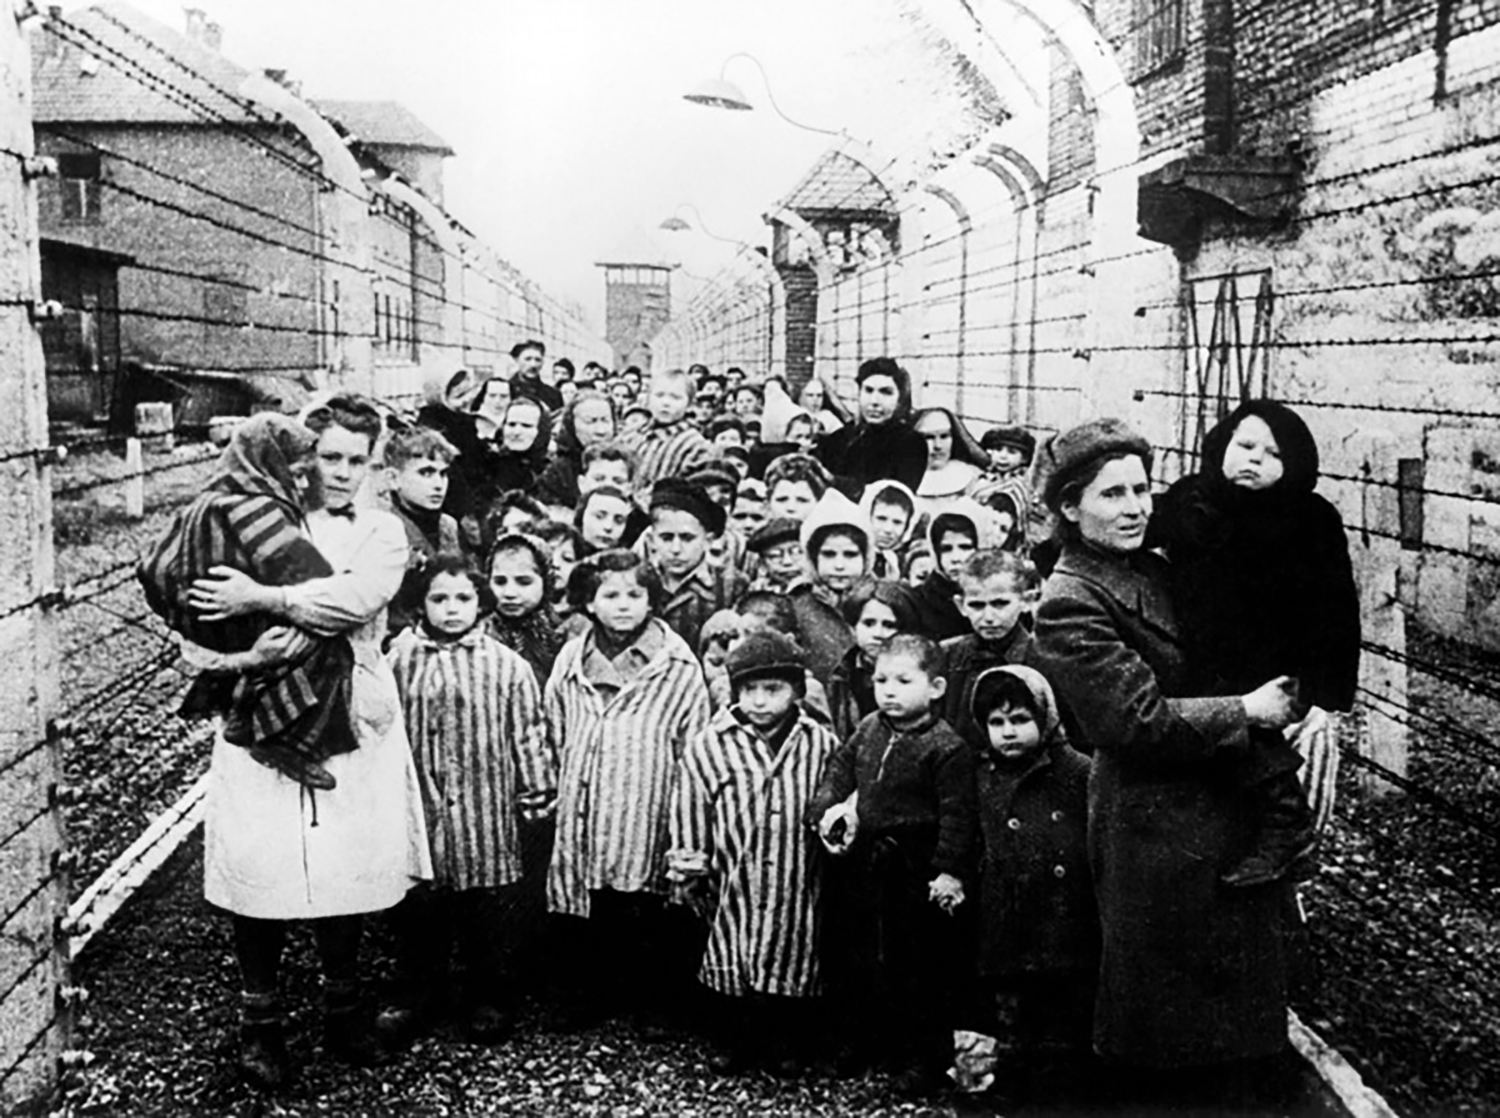 Children liberated in the Auschwitz concentration camp, 1945